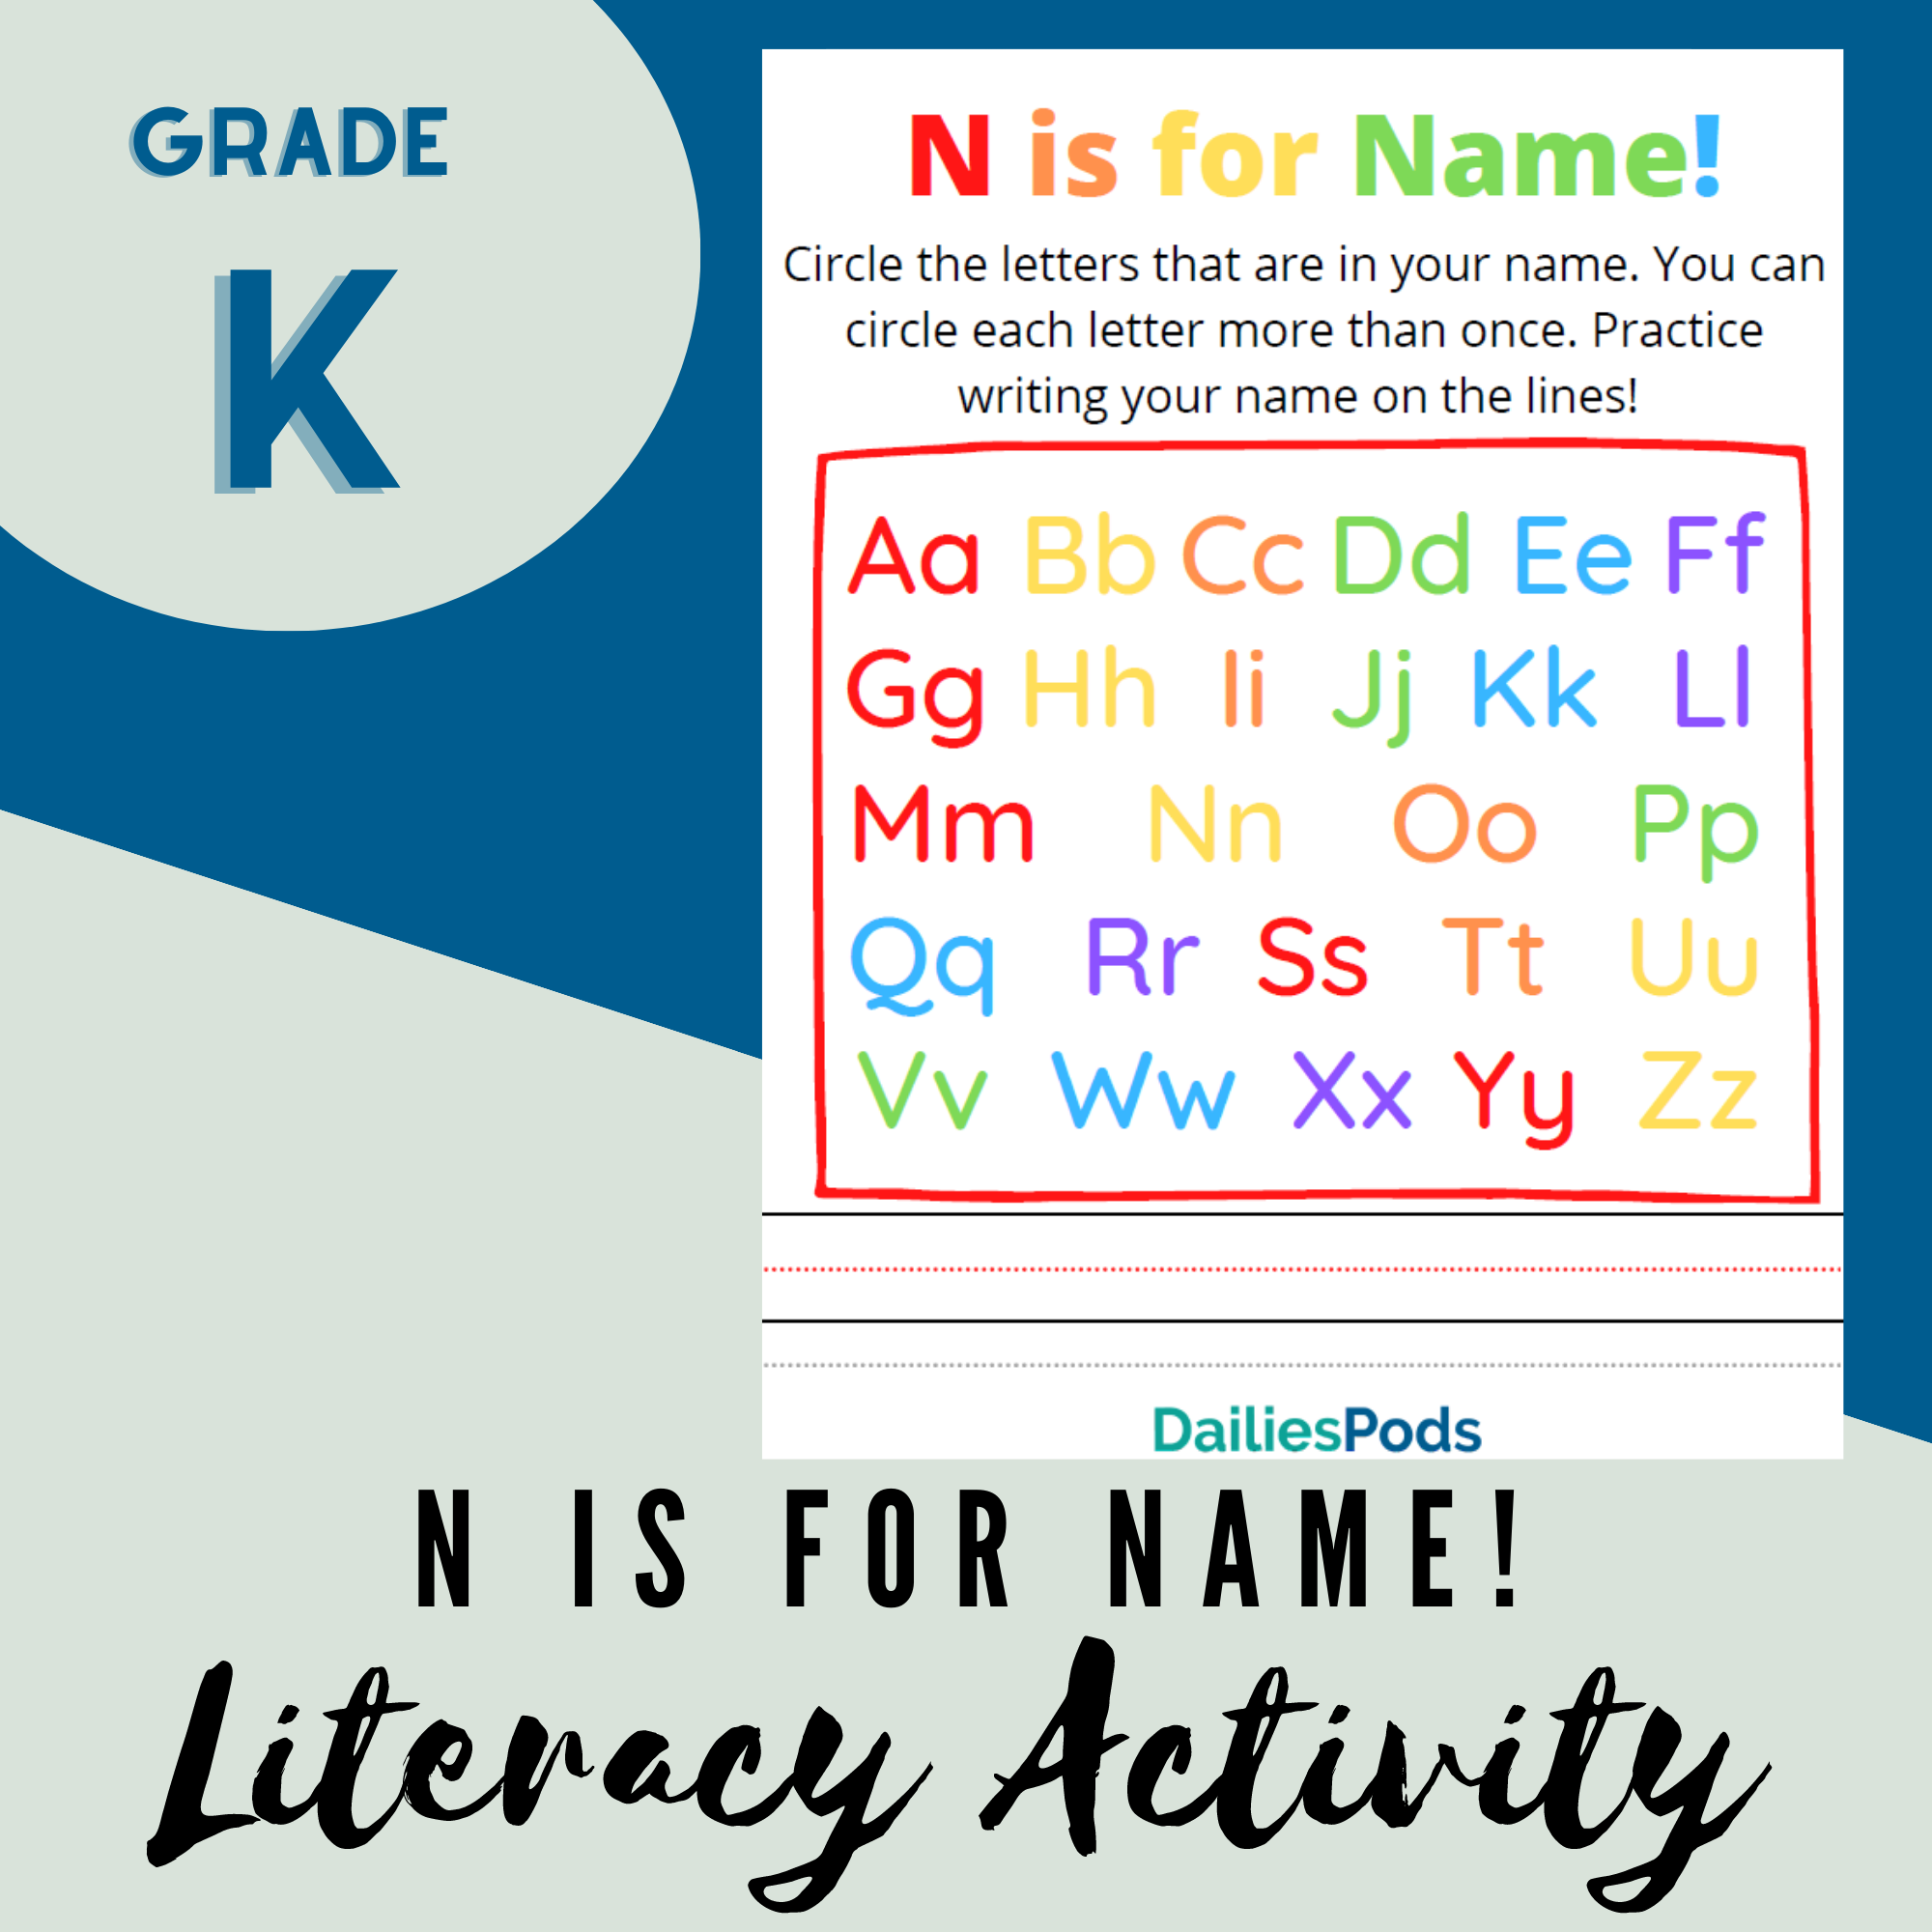 N is for Name